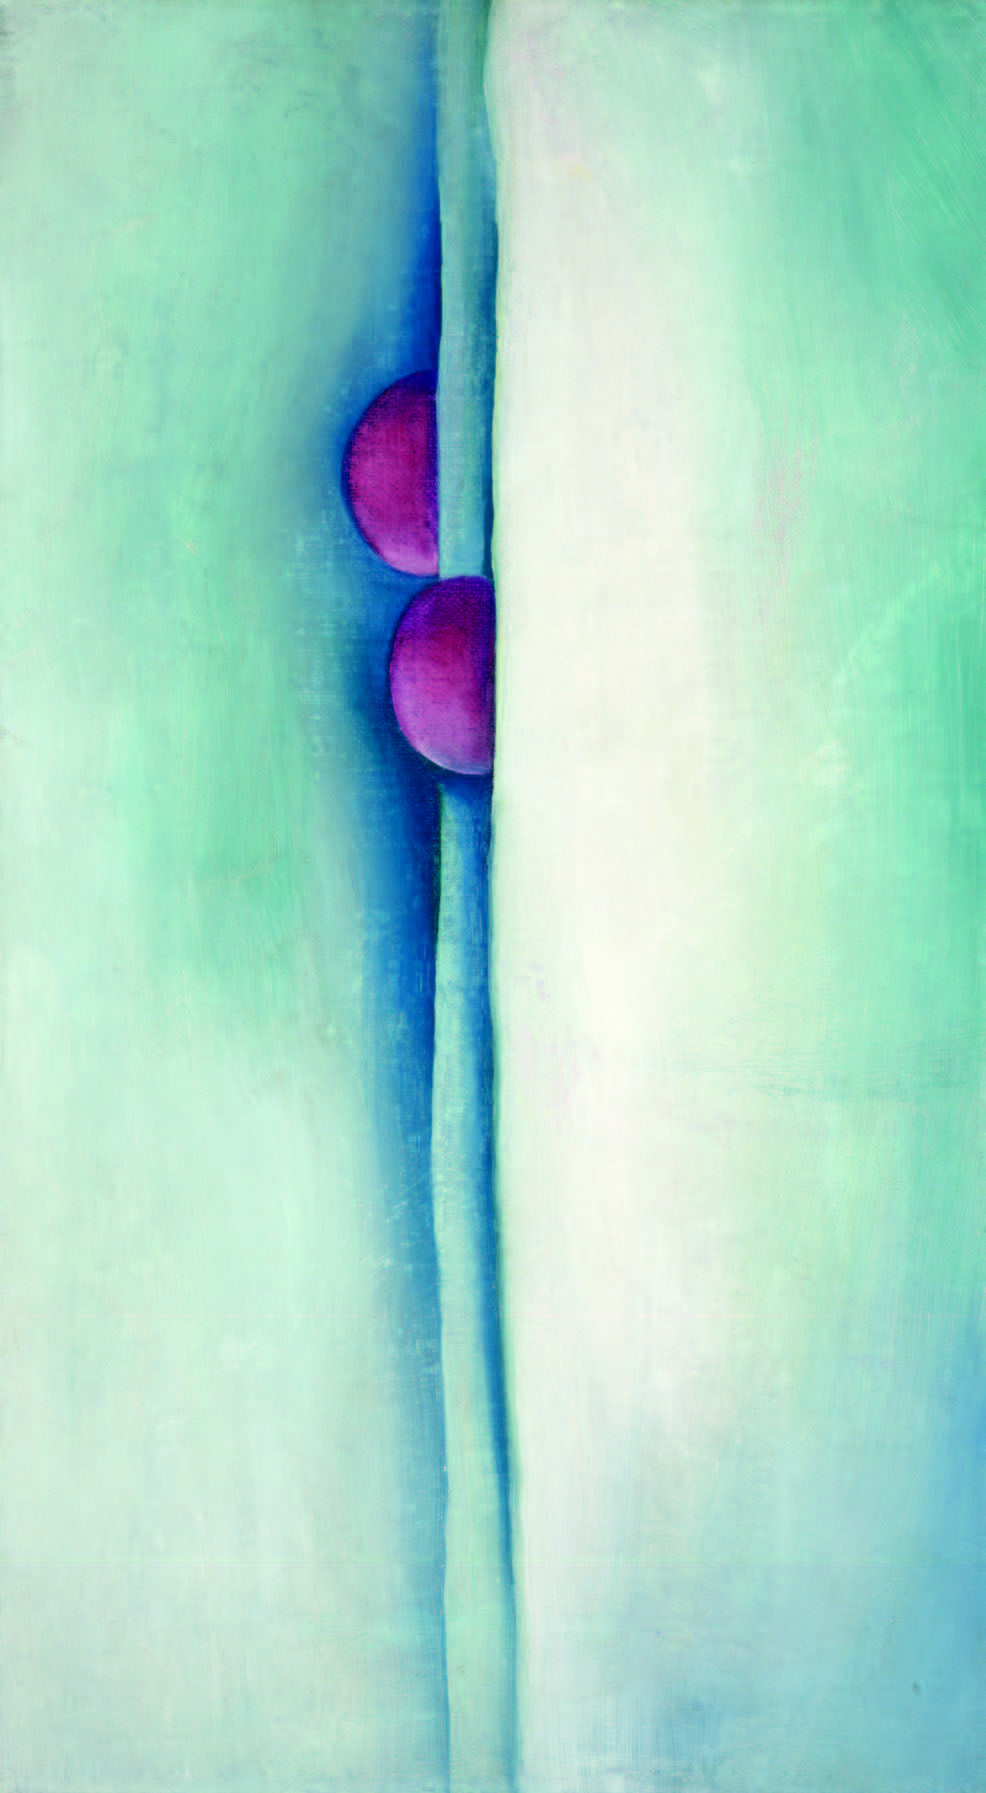 Georgia O’Keeffe, Green Lines and Pink, 1919. Oil on canvas, 18 × 10 in (45.7 × 25.4 cm). Georgia O’Keeffe Museum. Gift of the Burnett Foundation and the Georgia O’Keeffe Foundation (1997.05.007). © Georgia O’Keeffe Museum.